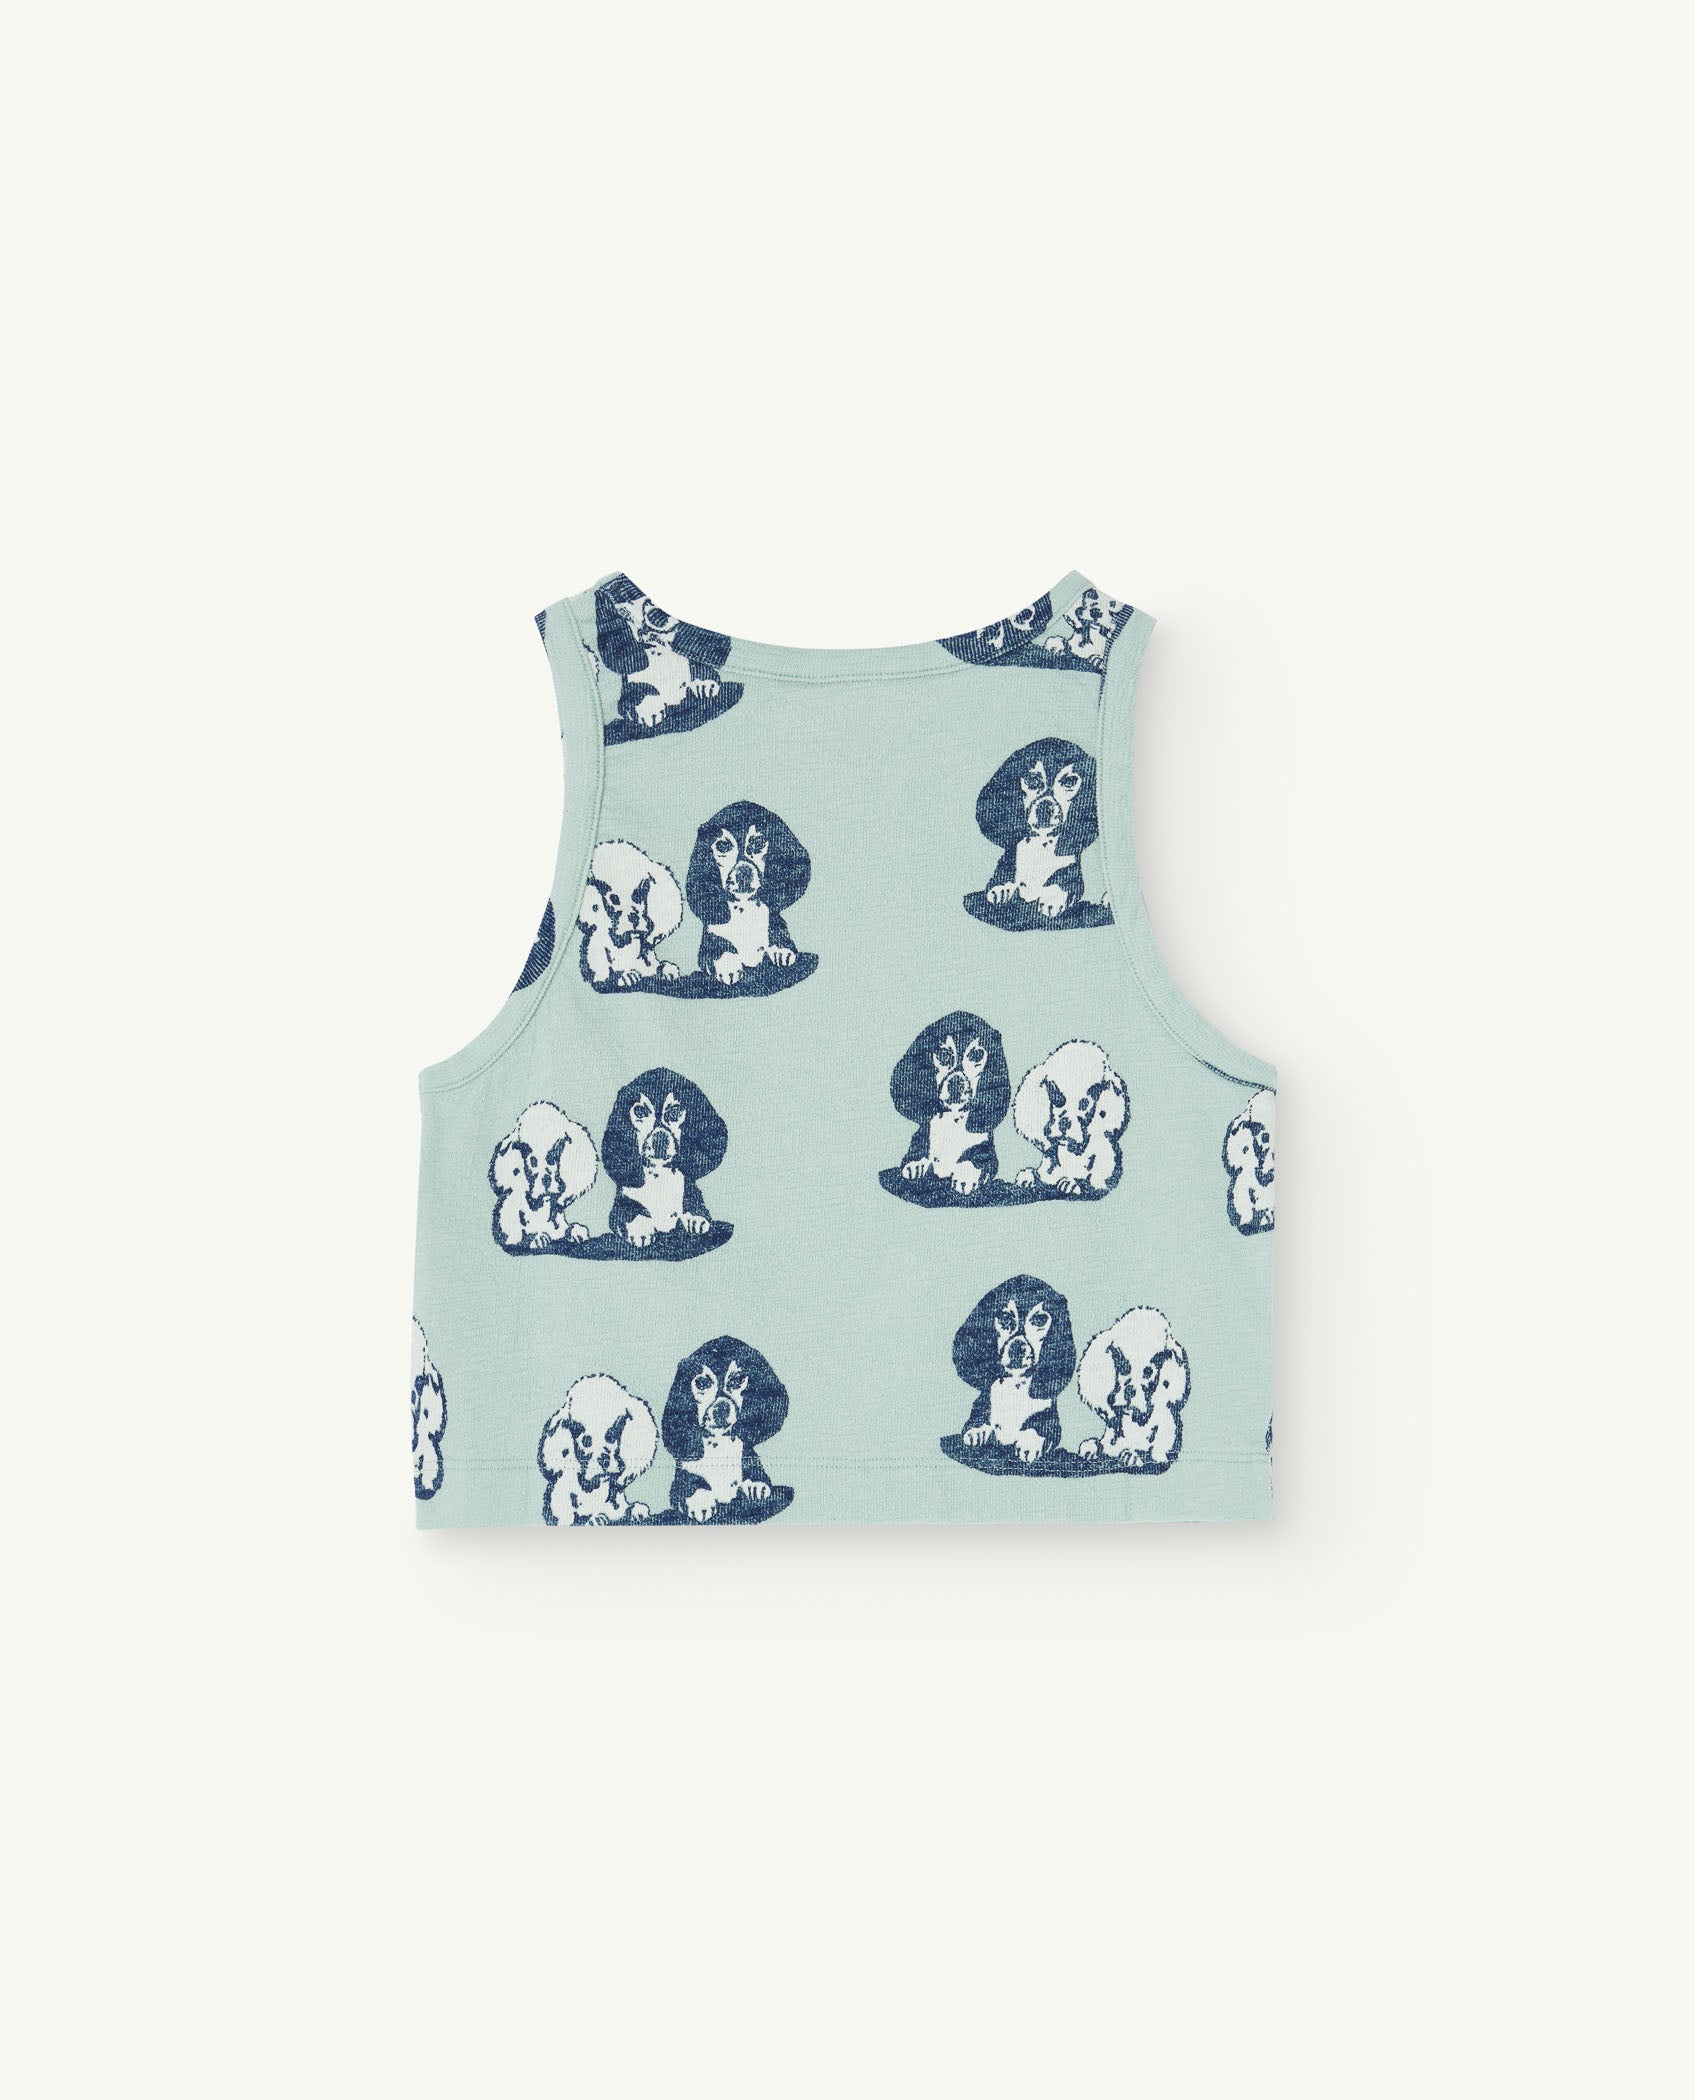 The animals observatory - hyena kids top - turquoise